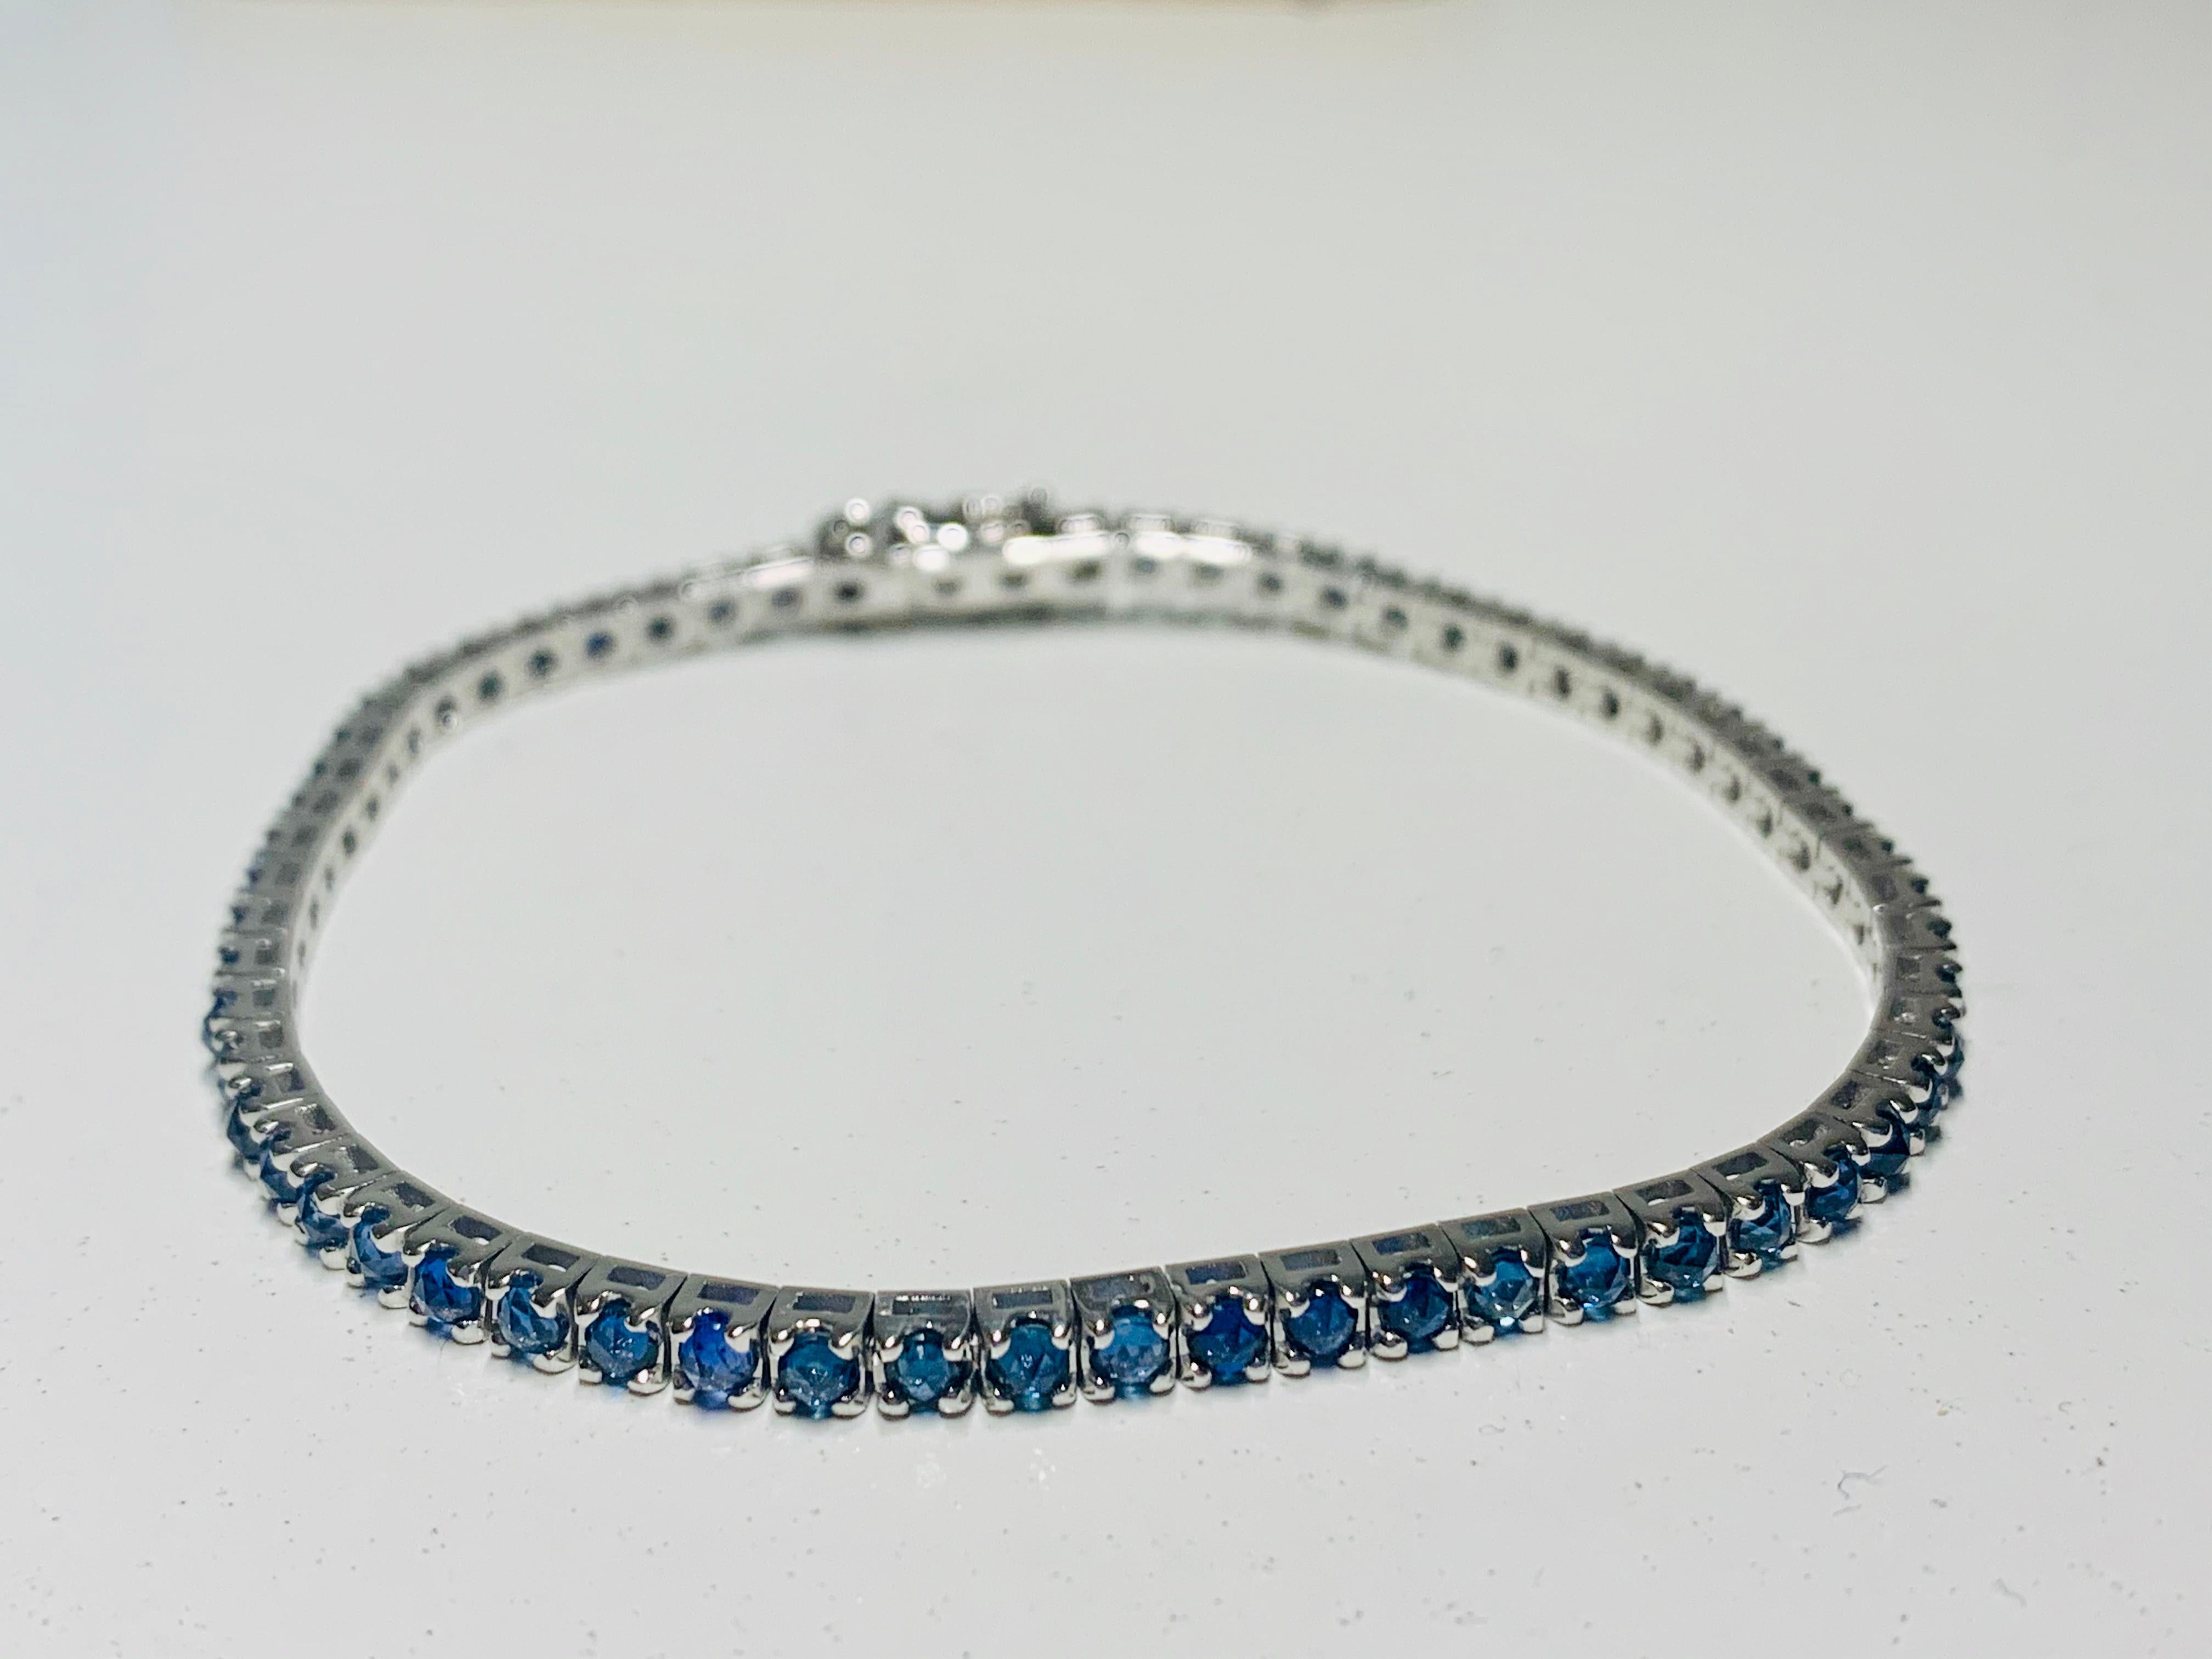 This 3.90 Carat Blue Sapphire & 18Kt White Gold Unisex Tennis Bracelet, suits any attire whatever the occasion or time of day. 

It beautifully sparkles and can be adored alone or worn stacked with other bracelets. 

Unisex it looks equally